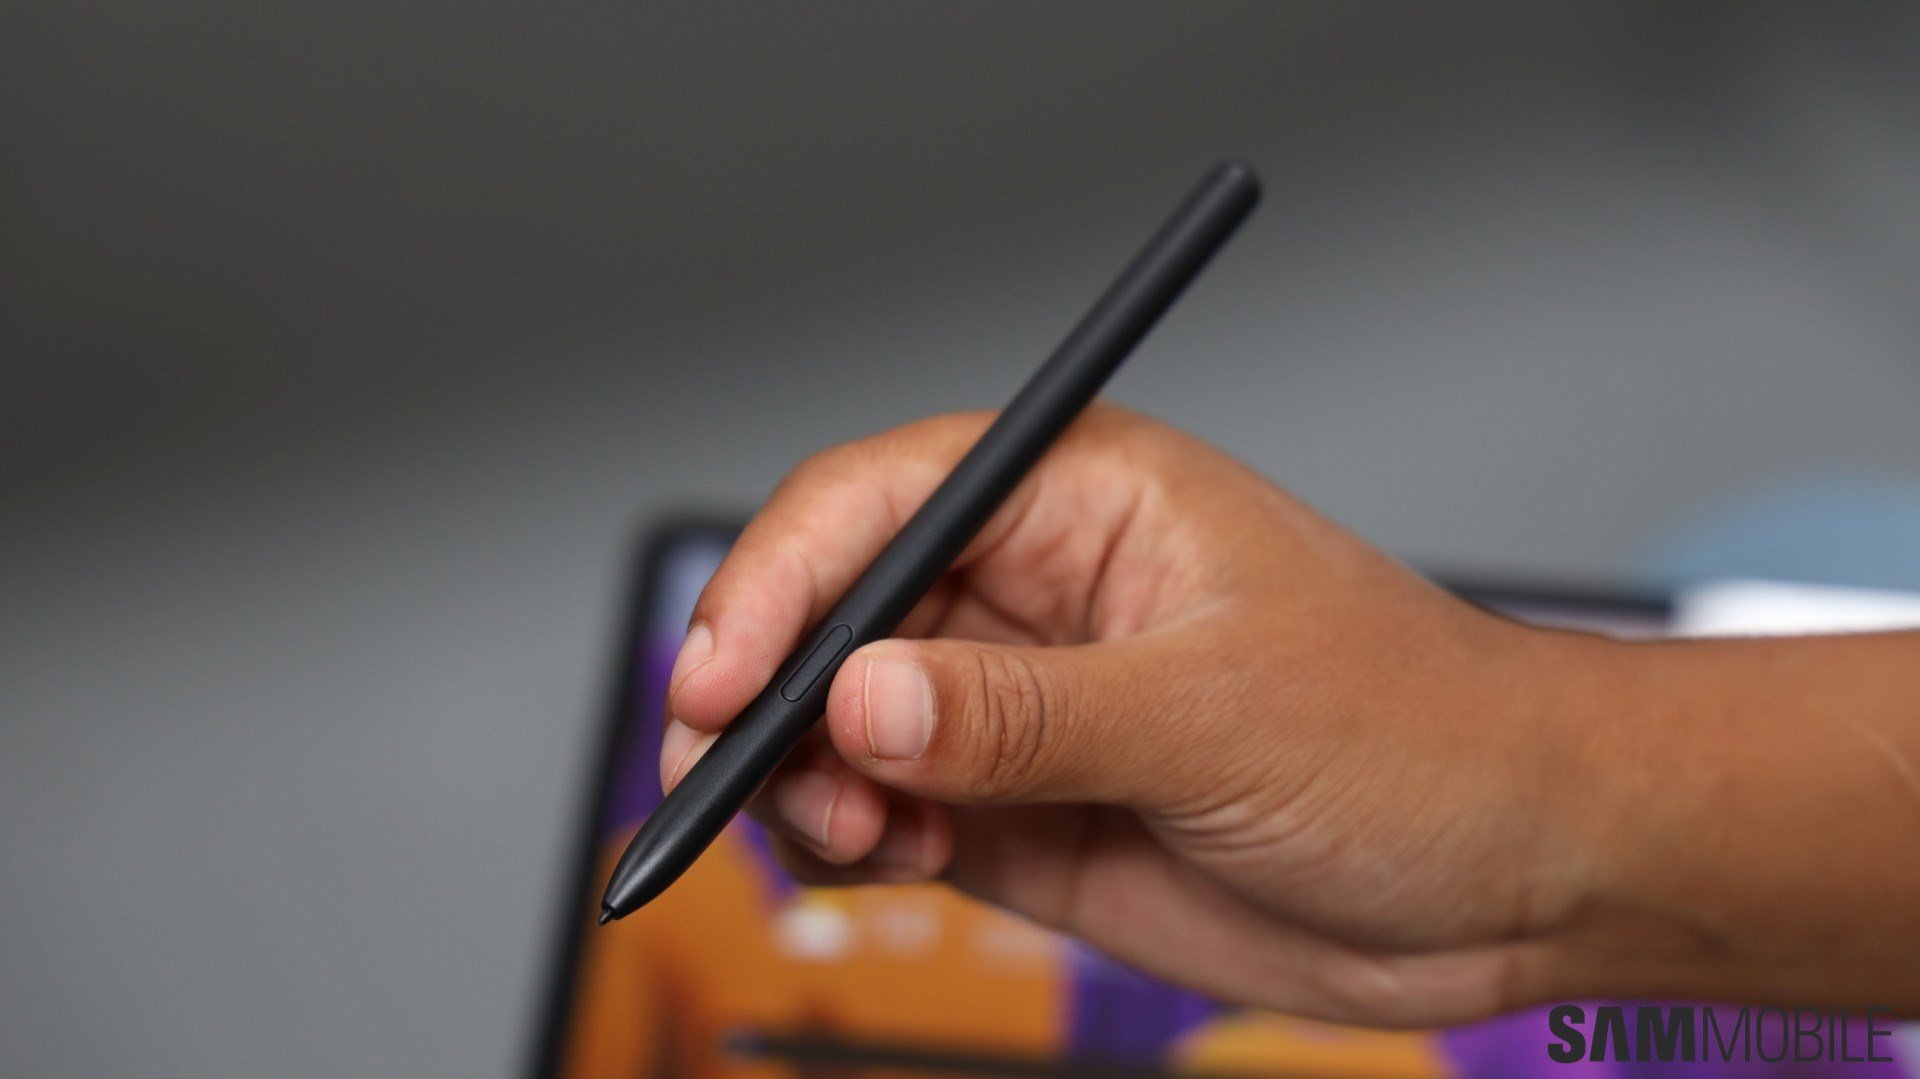 Samsung Galaxy Tab S8 Review: All About the S Pen - Reviewed